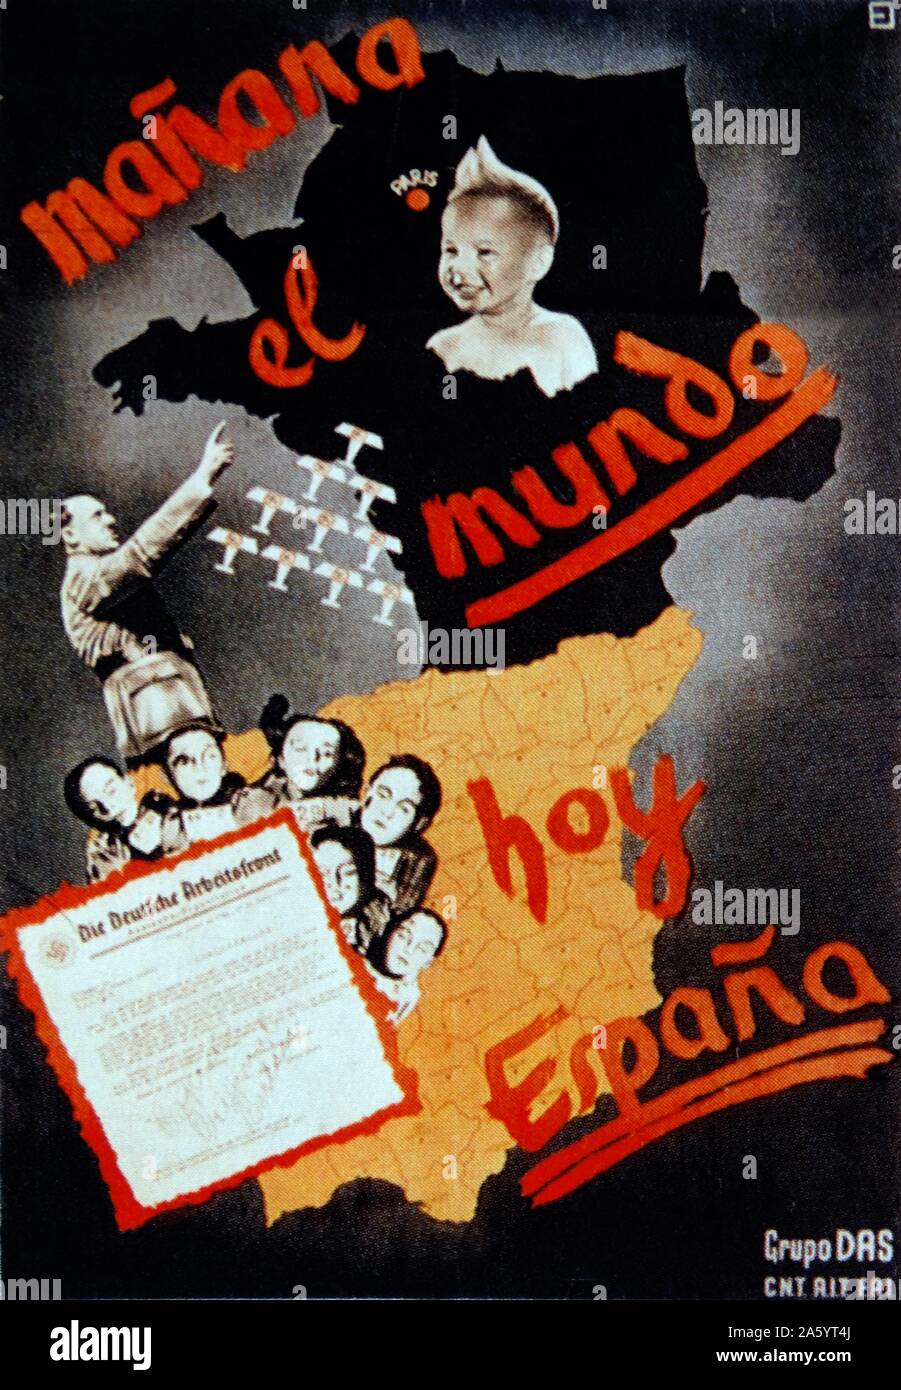 mañana el mundo - hoy Espana (tomorrow the world - today Spain) CNT Propaganda poster, 1936 Issued by Gruppo DAS, an antifascist group of German volunteer fighters in Spain during the Spanish Civil War, Showing Hitler threatening the world, with German aircraft, after committing atrocities in Spain. Stock Photo